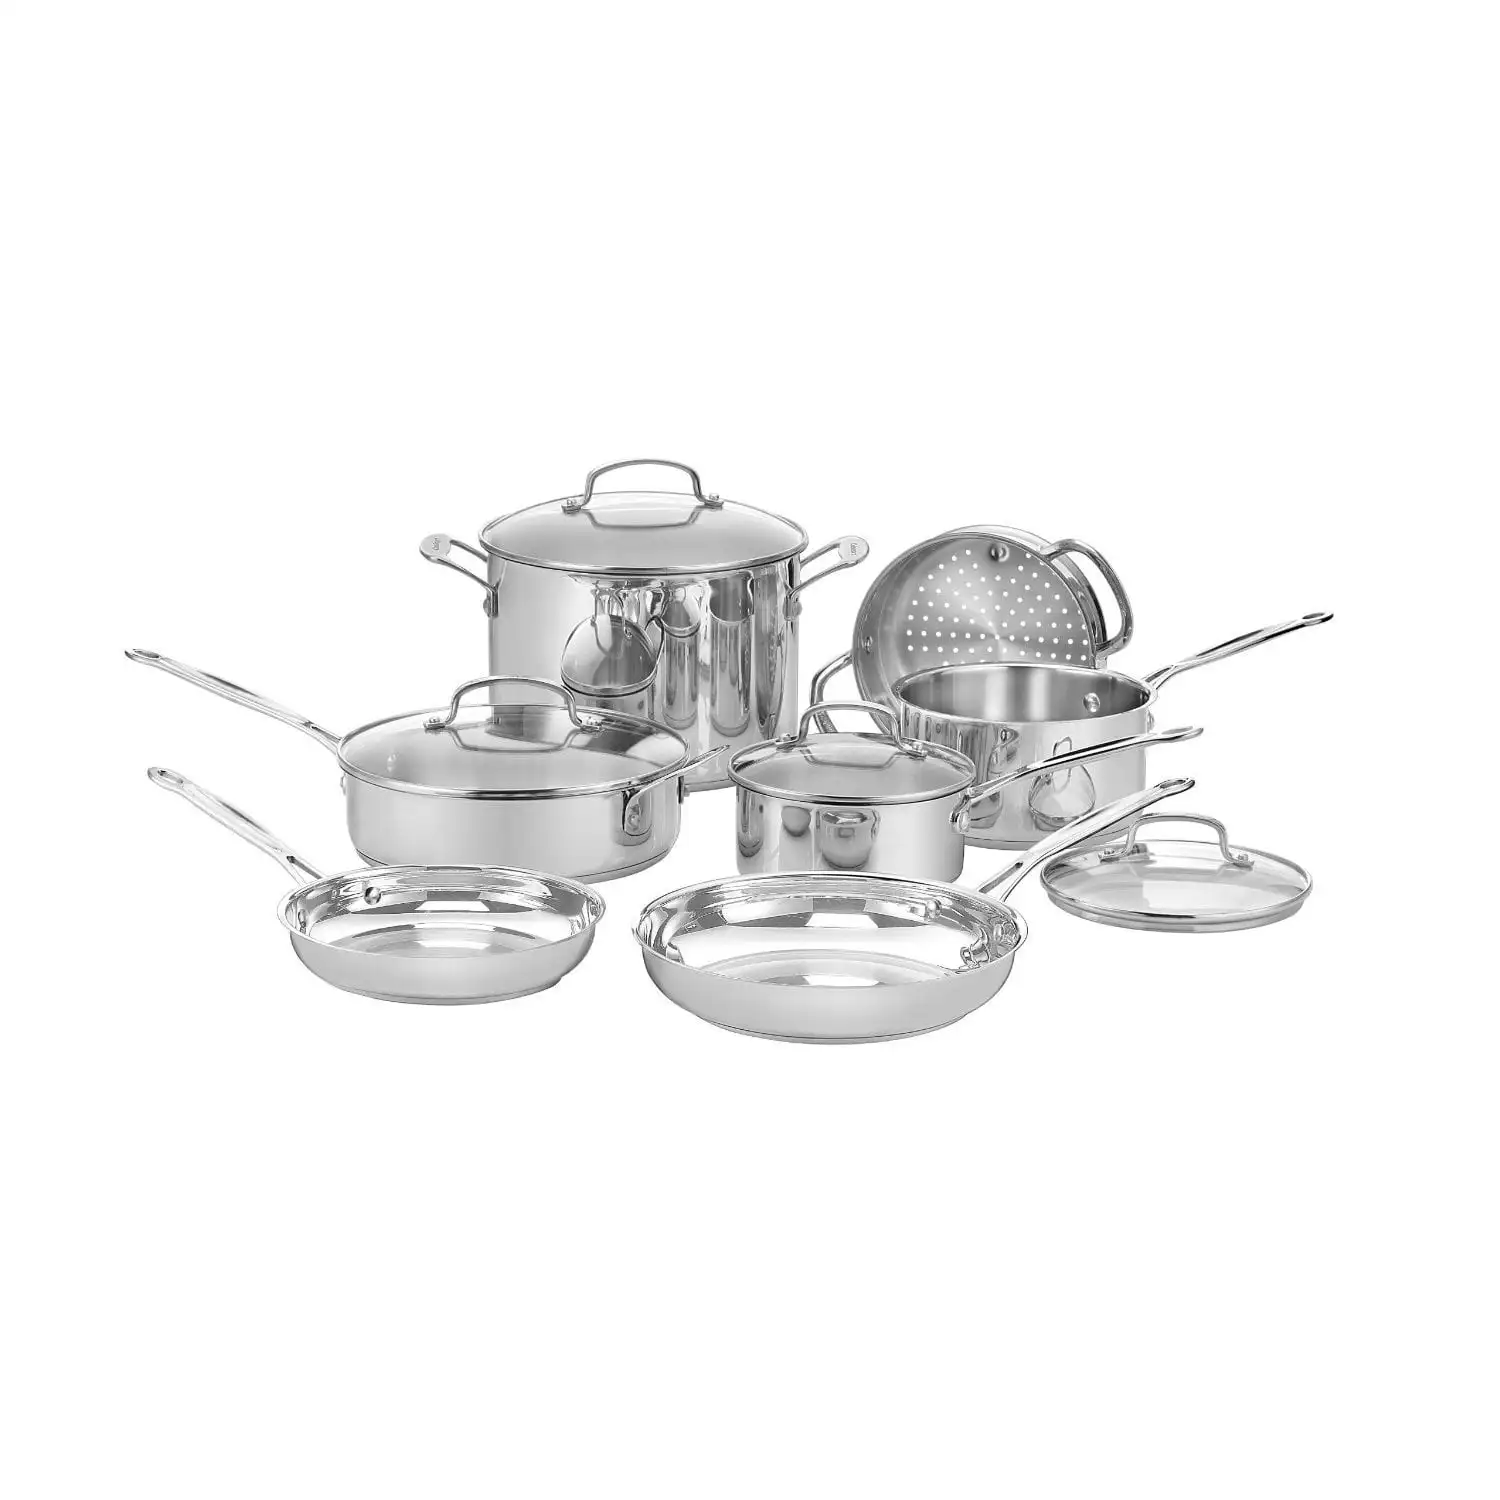 https://ae01.alicdn.com/kf/S11221455bc644dc5917707d4a8971cf2k/Classic-Stainless-Steel-11-Piece-Cookware-Set-77-11G-Pots-and-Pans-Cooking-Pots-Set-Stainless.jpg